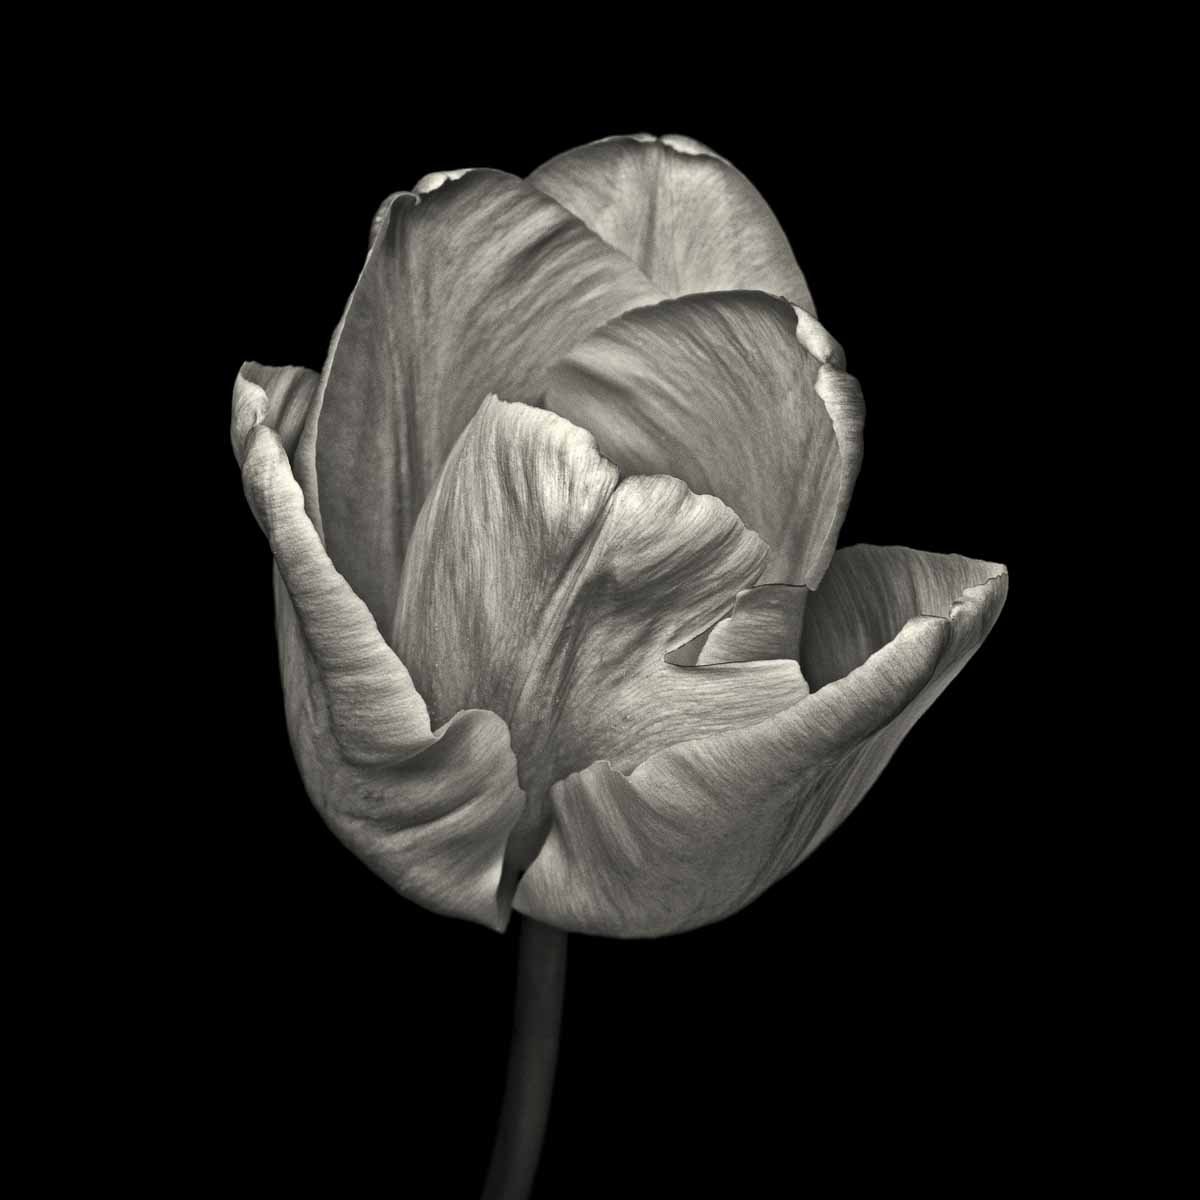 Pink Tulip IV by Paul Coghlin